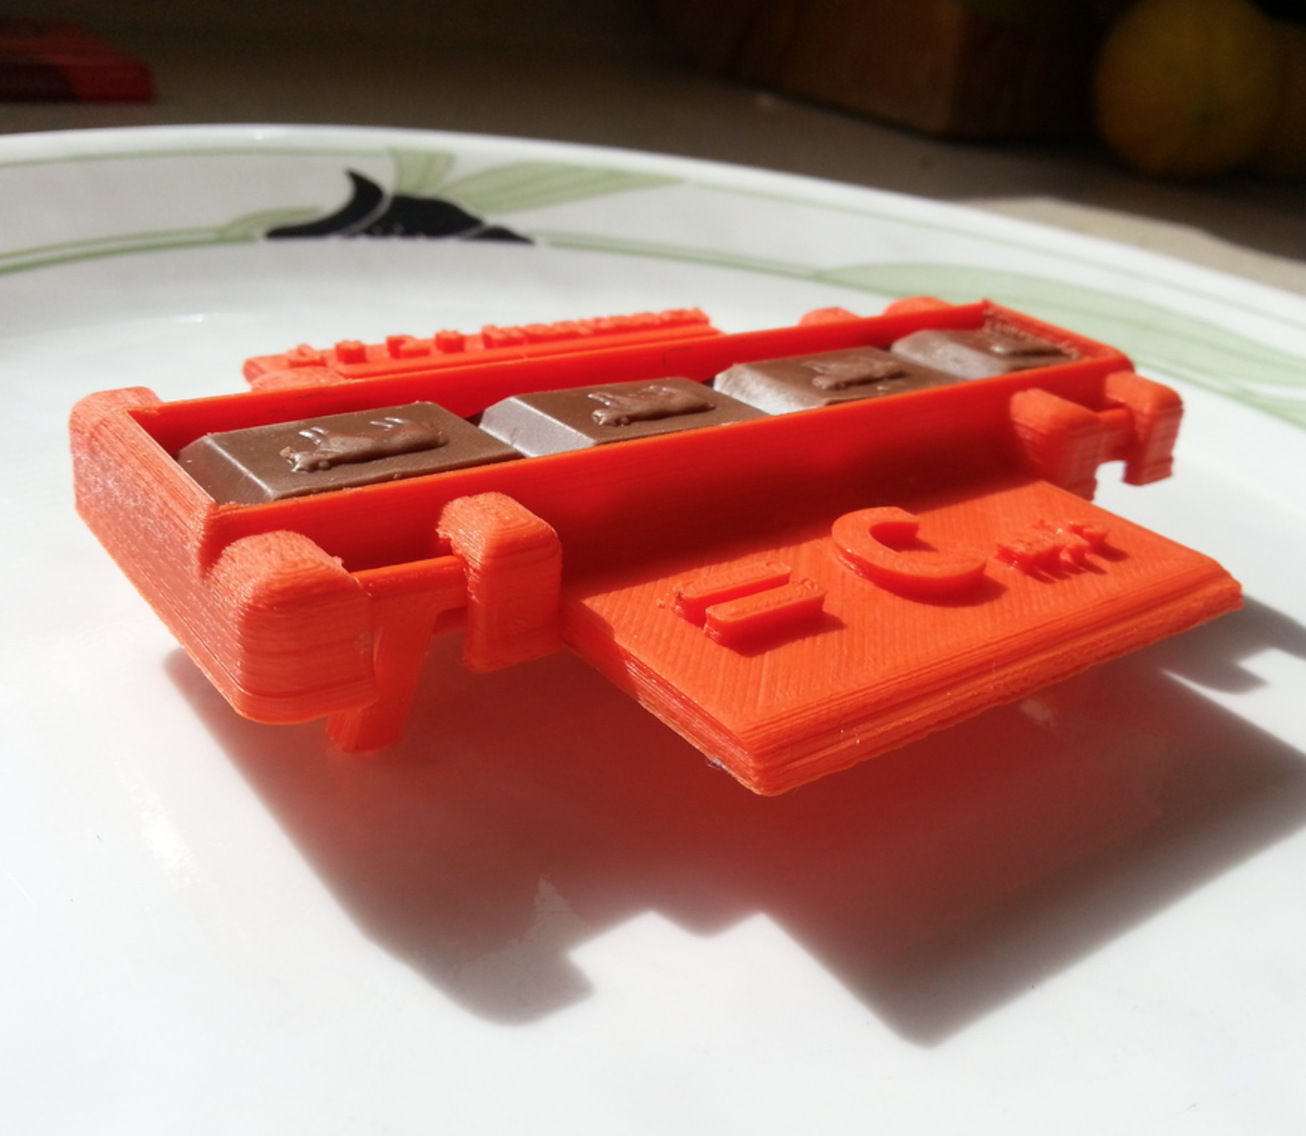 Capture d’écran 2016-12-14 à 16.29.49.png Download free STL file Measure the Speed of Light With Chocolate! • 3D printer object, Yuval_Dascalu